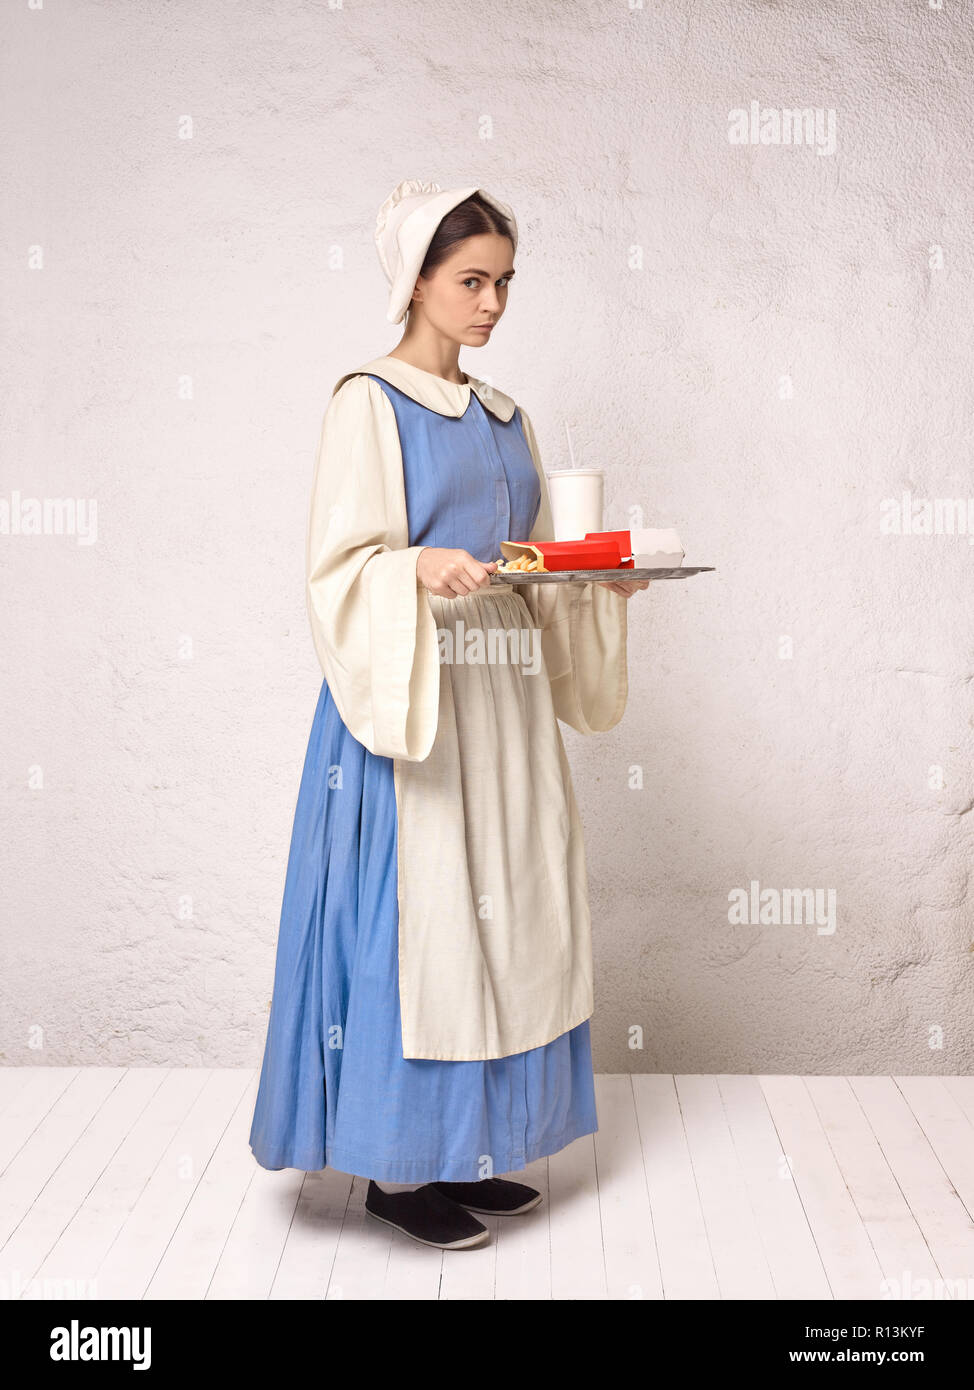 Medieval Woman in Historical Costume Wearing Corset Dress and Bonnet.  Beautiful peasant girl wearing thrush costume Stock Photo - Alamy